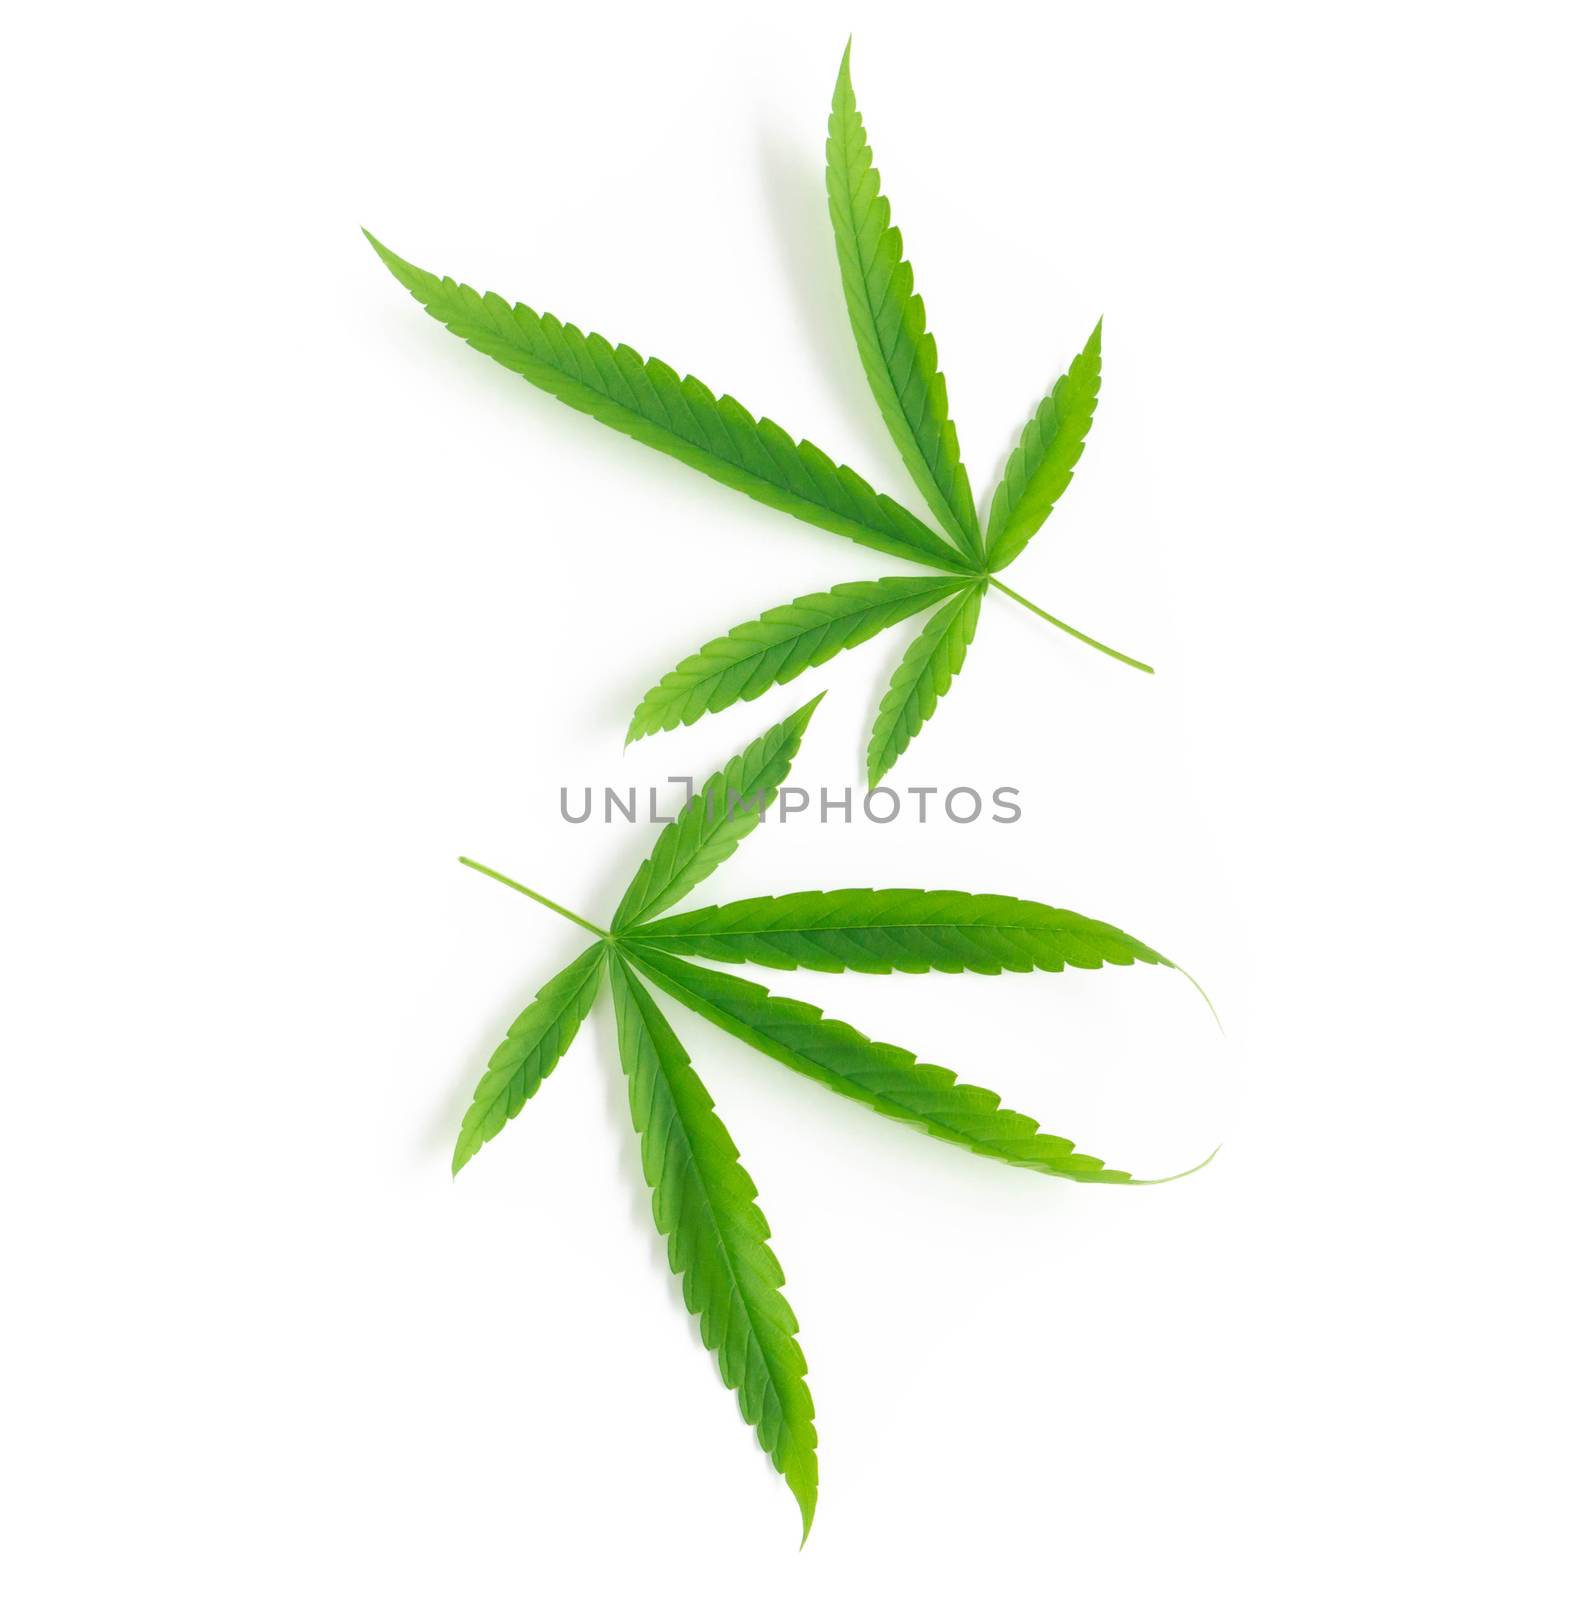 Young cannabis or marijuana leaf plant on white background, heal by pt.pongsak@gmail.com